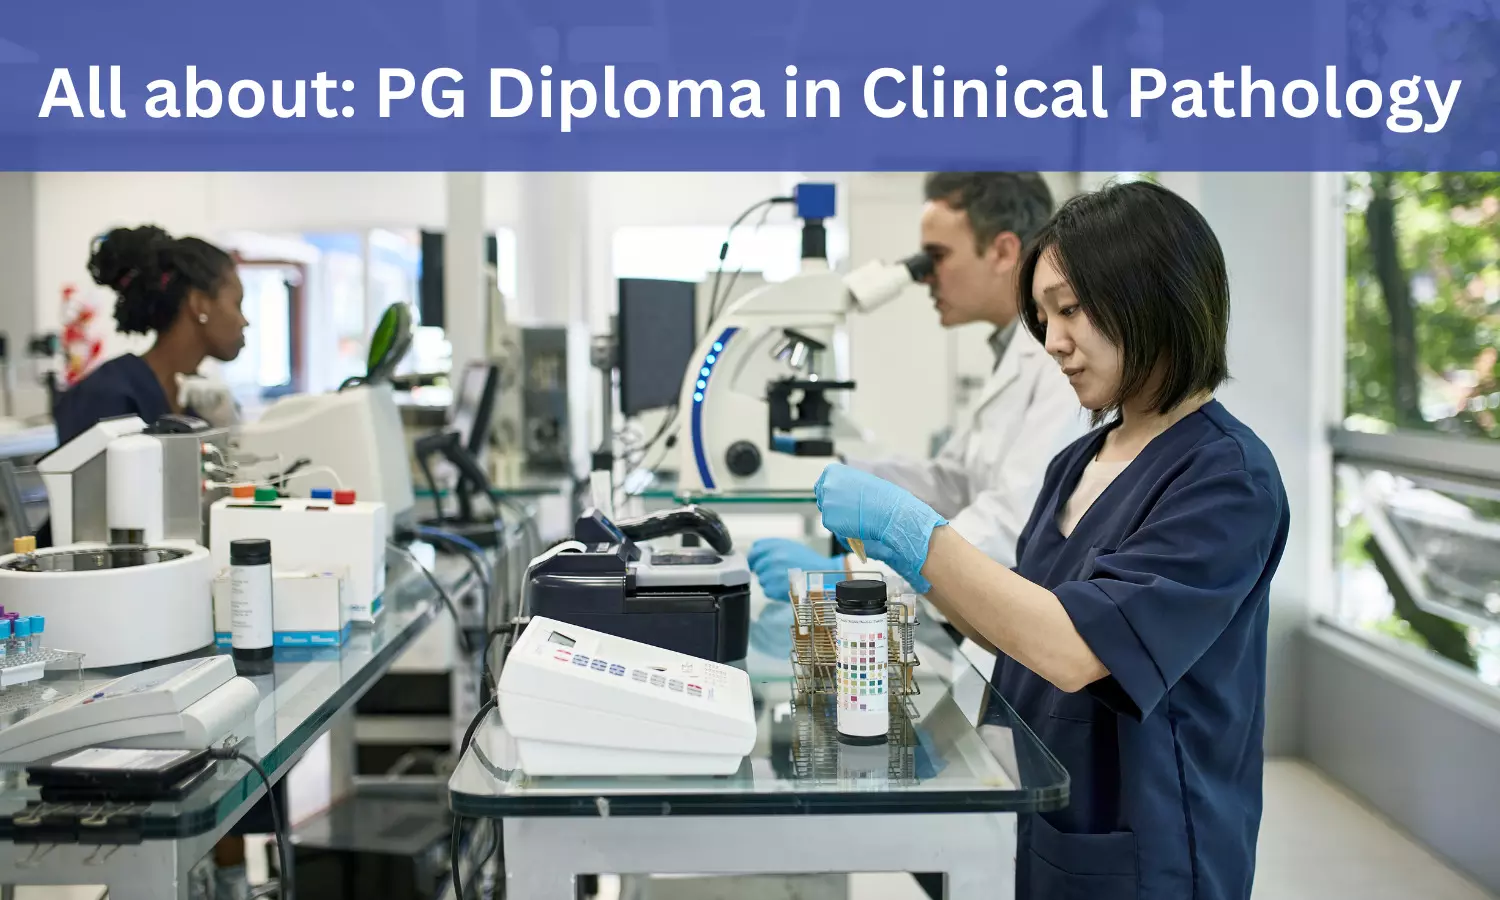 PG Diploma in Clinical Pathology: Admission, Medical Colleges, Fee, Eligibility criteria details here